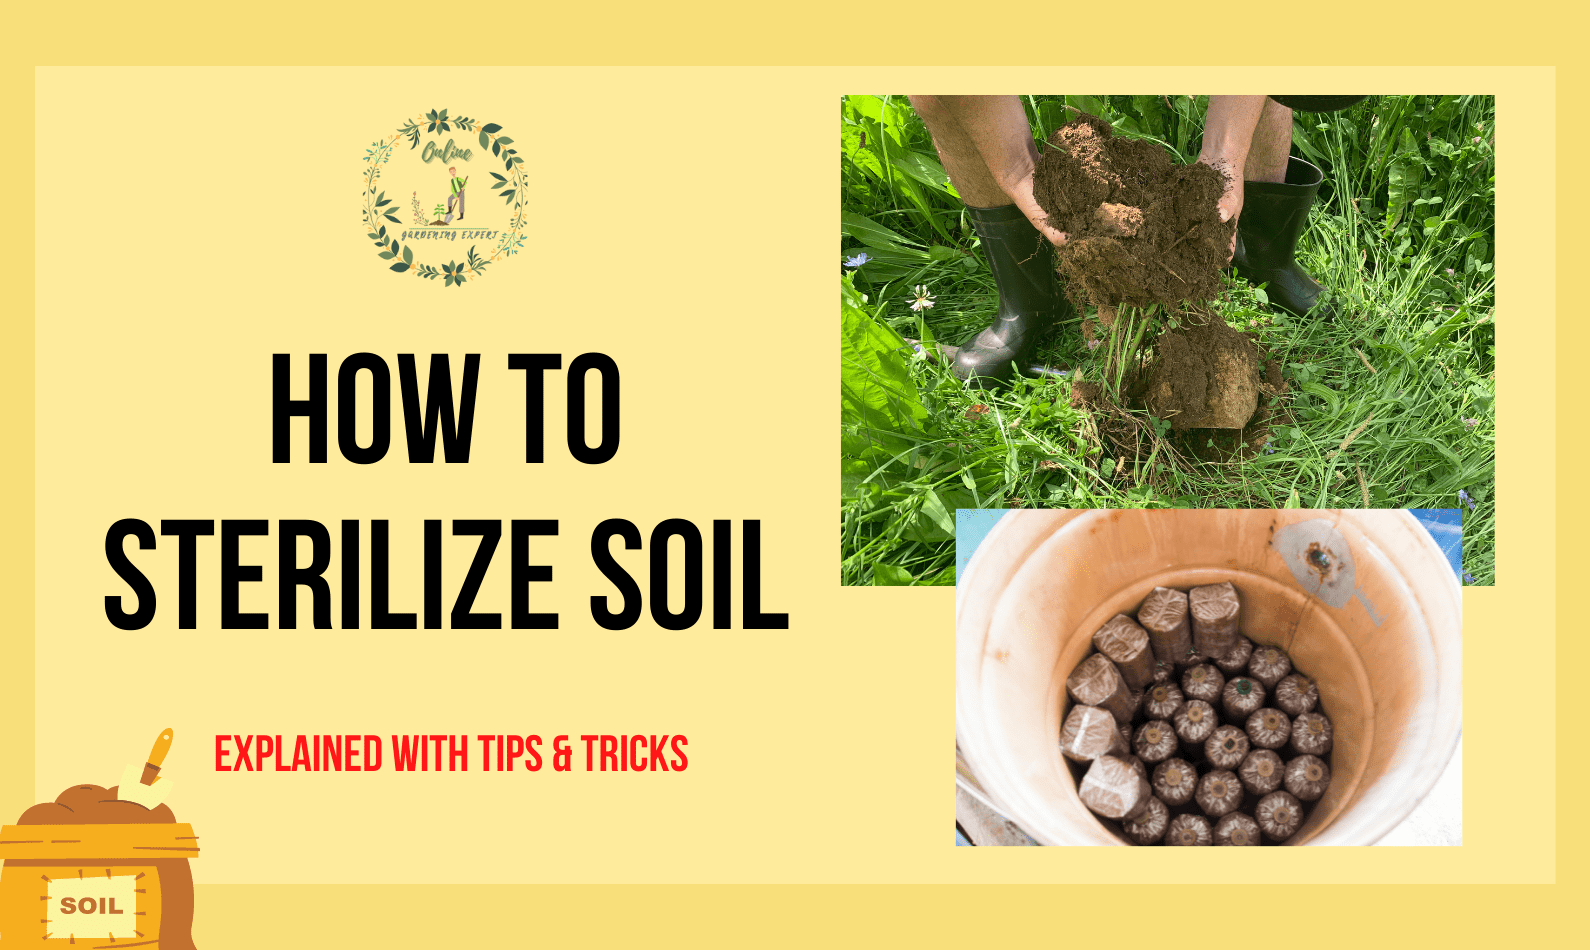 How to Sterilize Soil?